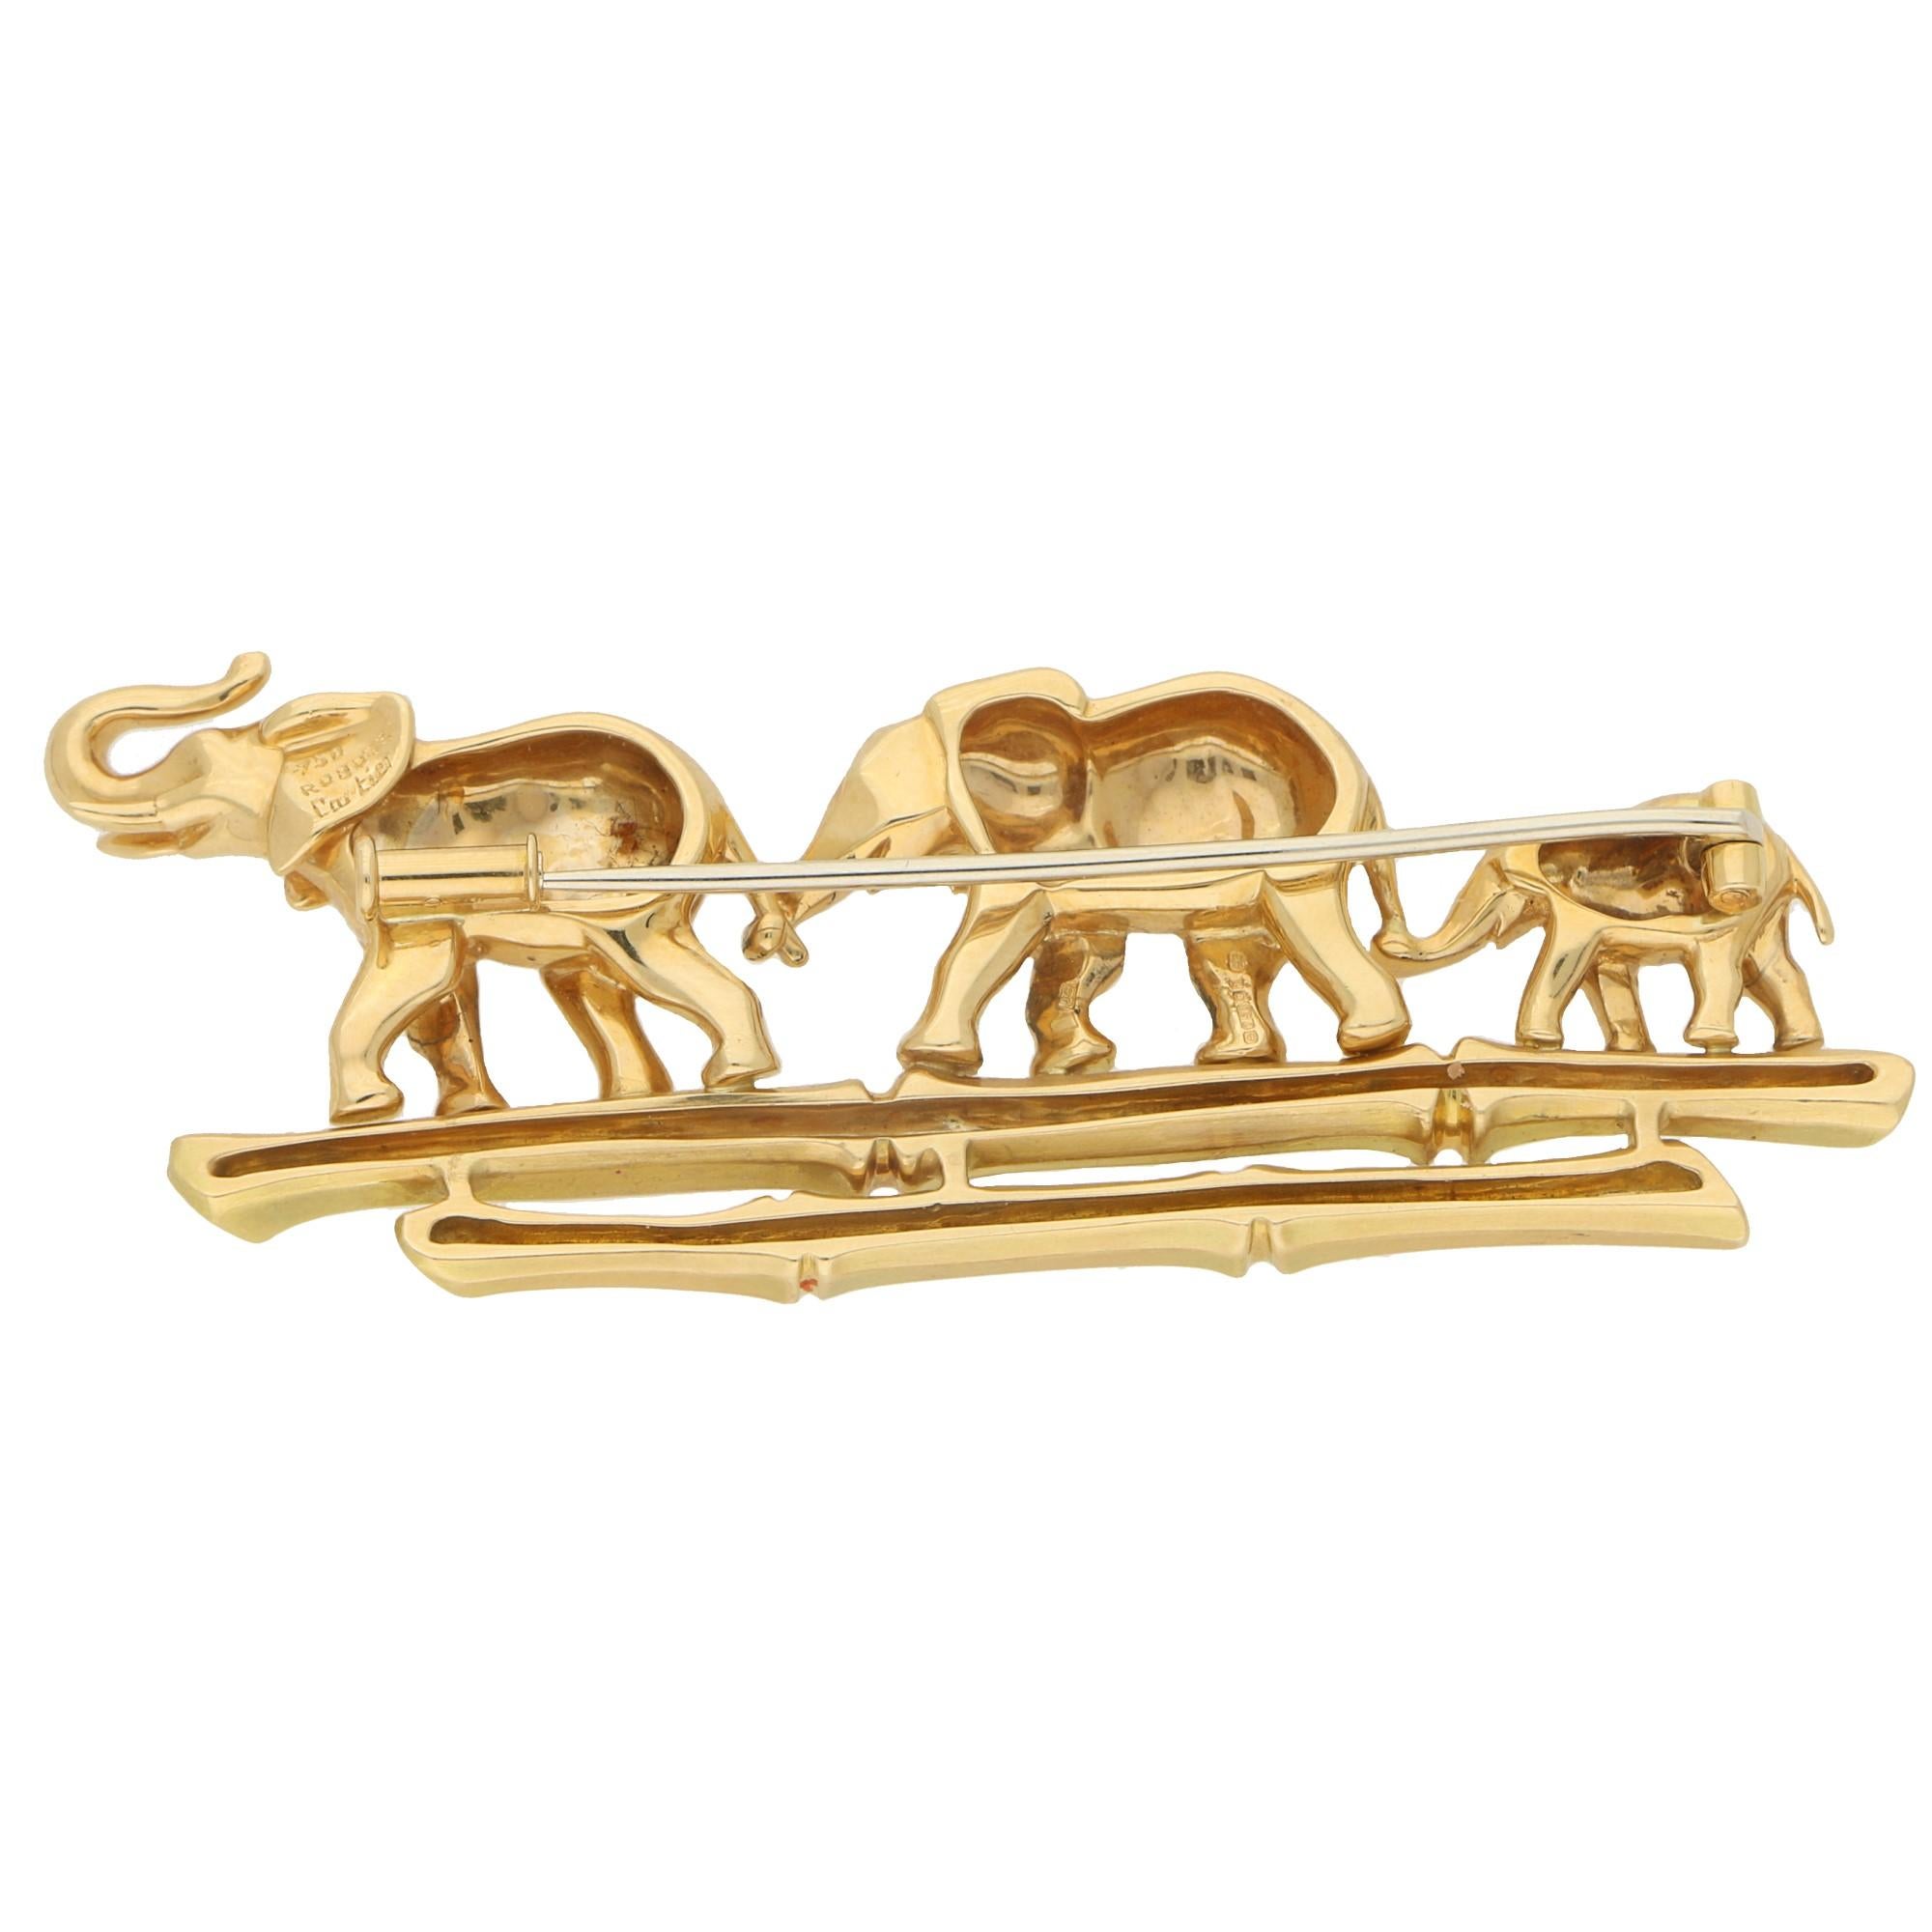 A beautiful family of walking elephant's brooch set in 18k yellow gold, signed Cartier. This spectacular piece is called the 'Tsavo' brooch from the 'Route des Indes' collection which was a popular vintage collection in the late 1990's. 

The brooch